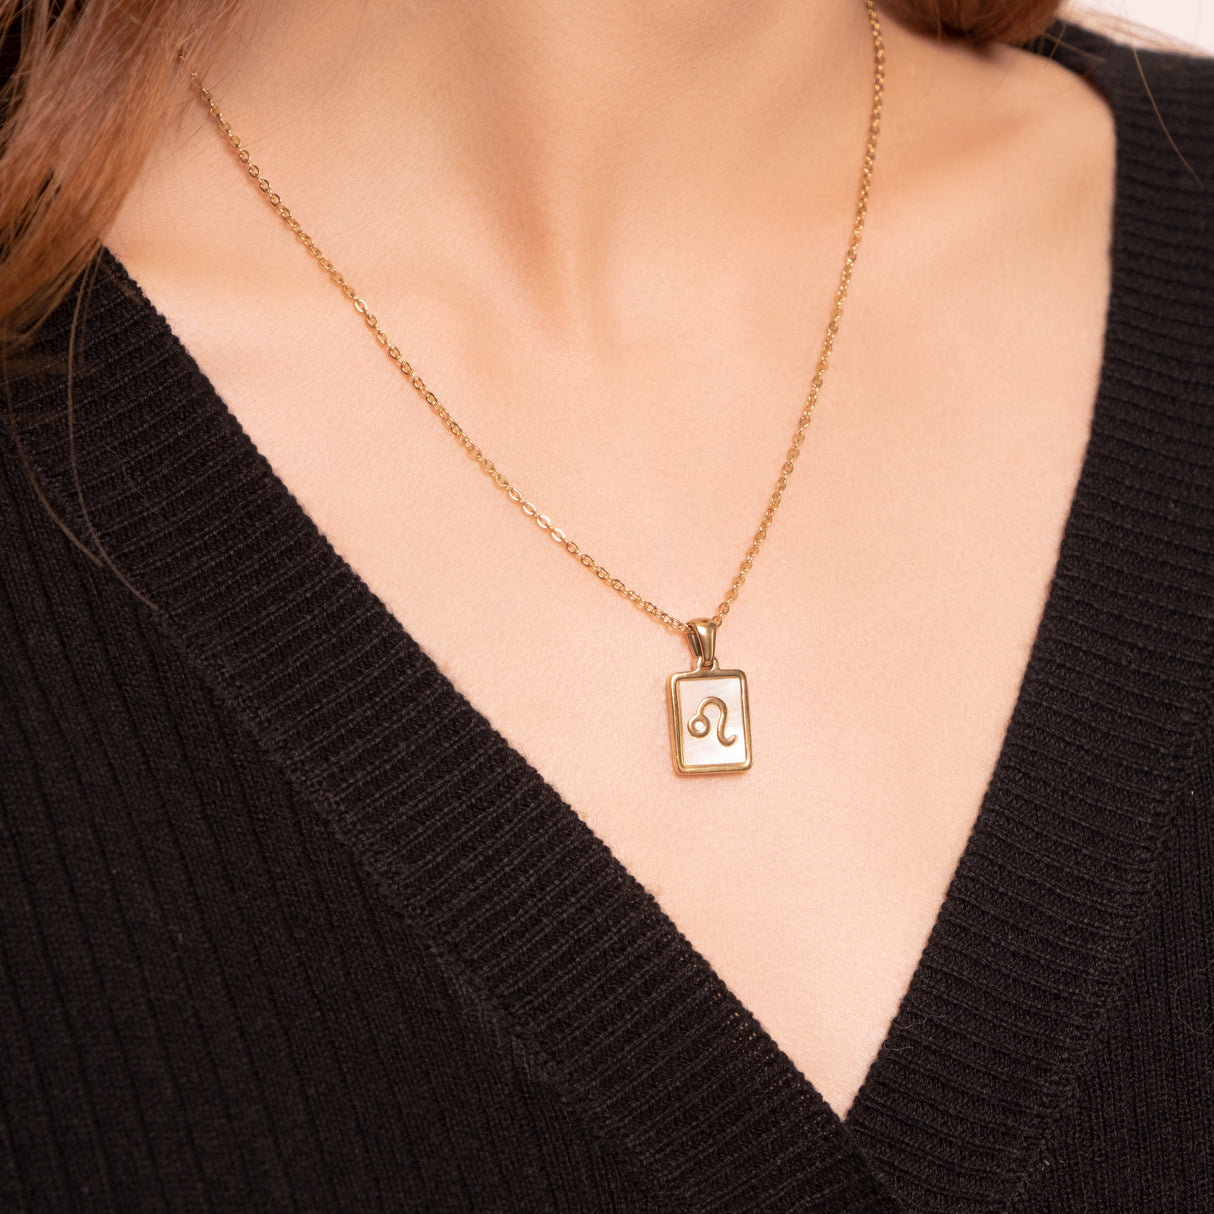 14K Gold Plated Gold 12 Constellation Pendant Necklace White Square - GexWorldwide